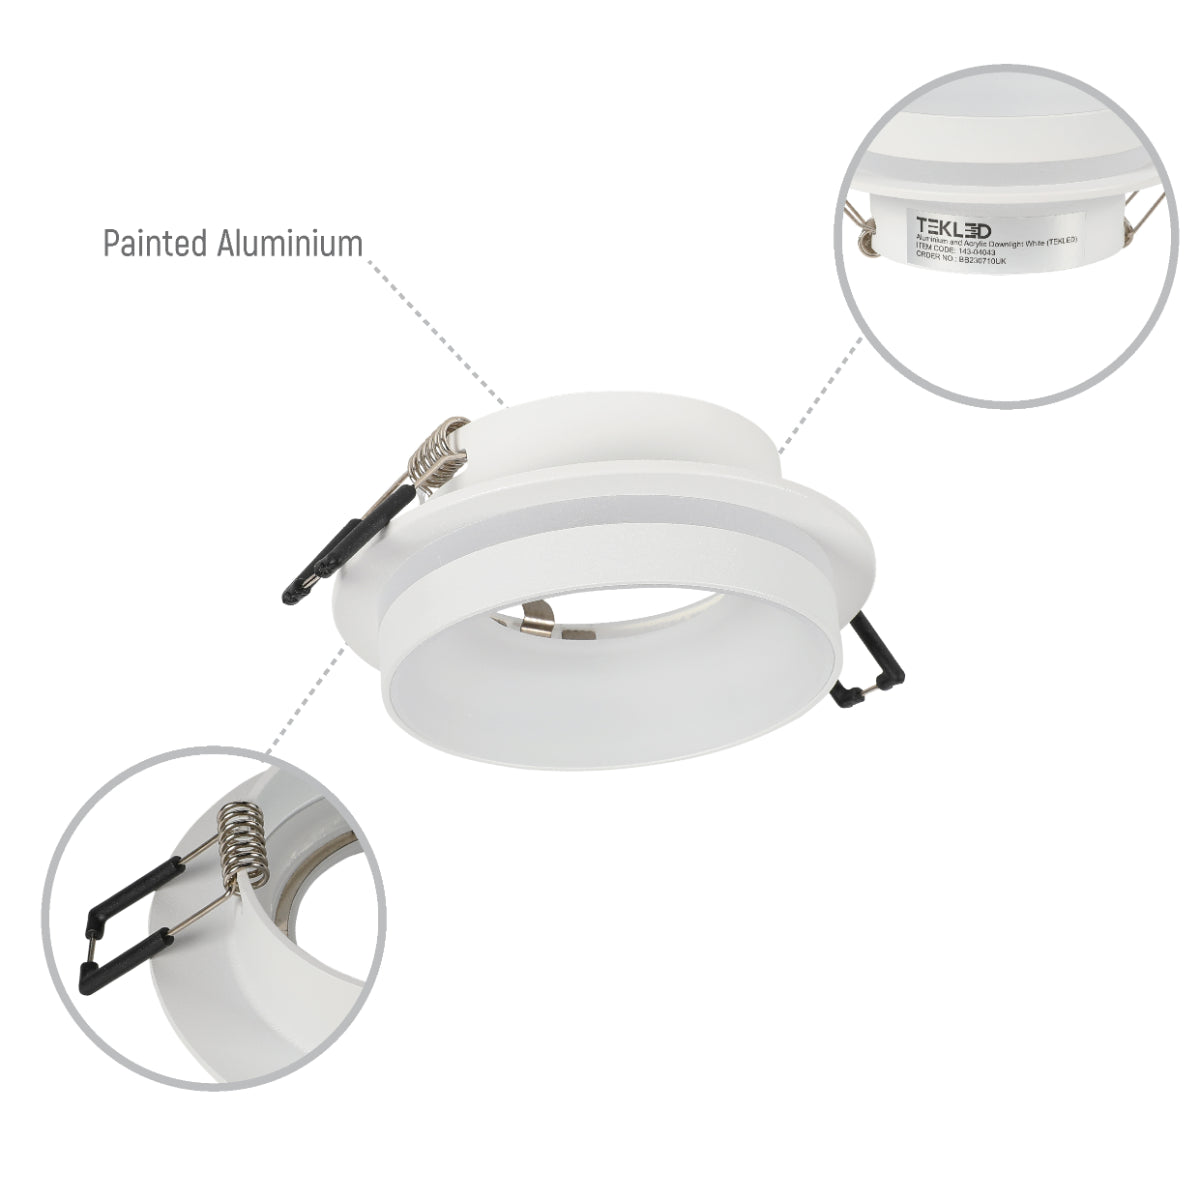 Lighting properties of GU10 Recessed Aluminium Downlight - Dual-Tone Acrylic with Color Matched Trim 143-04043